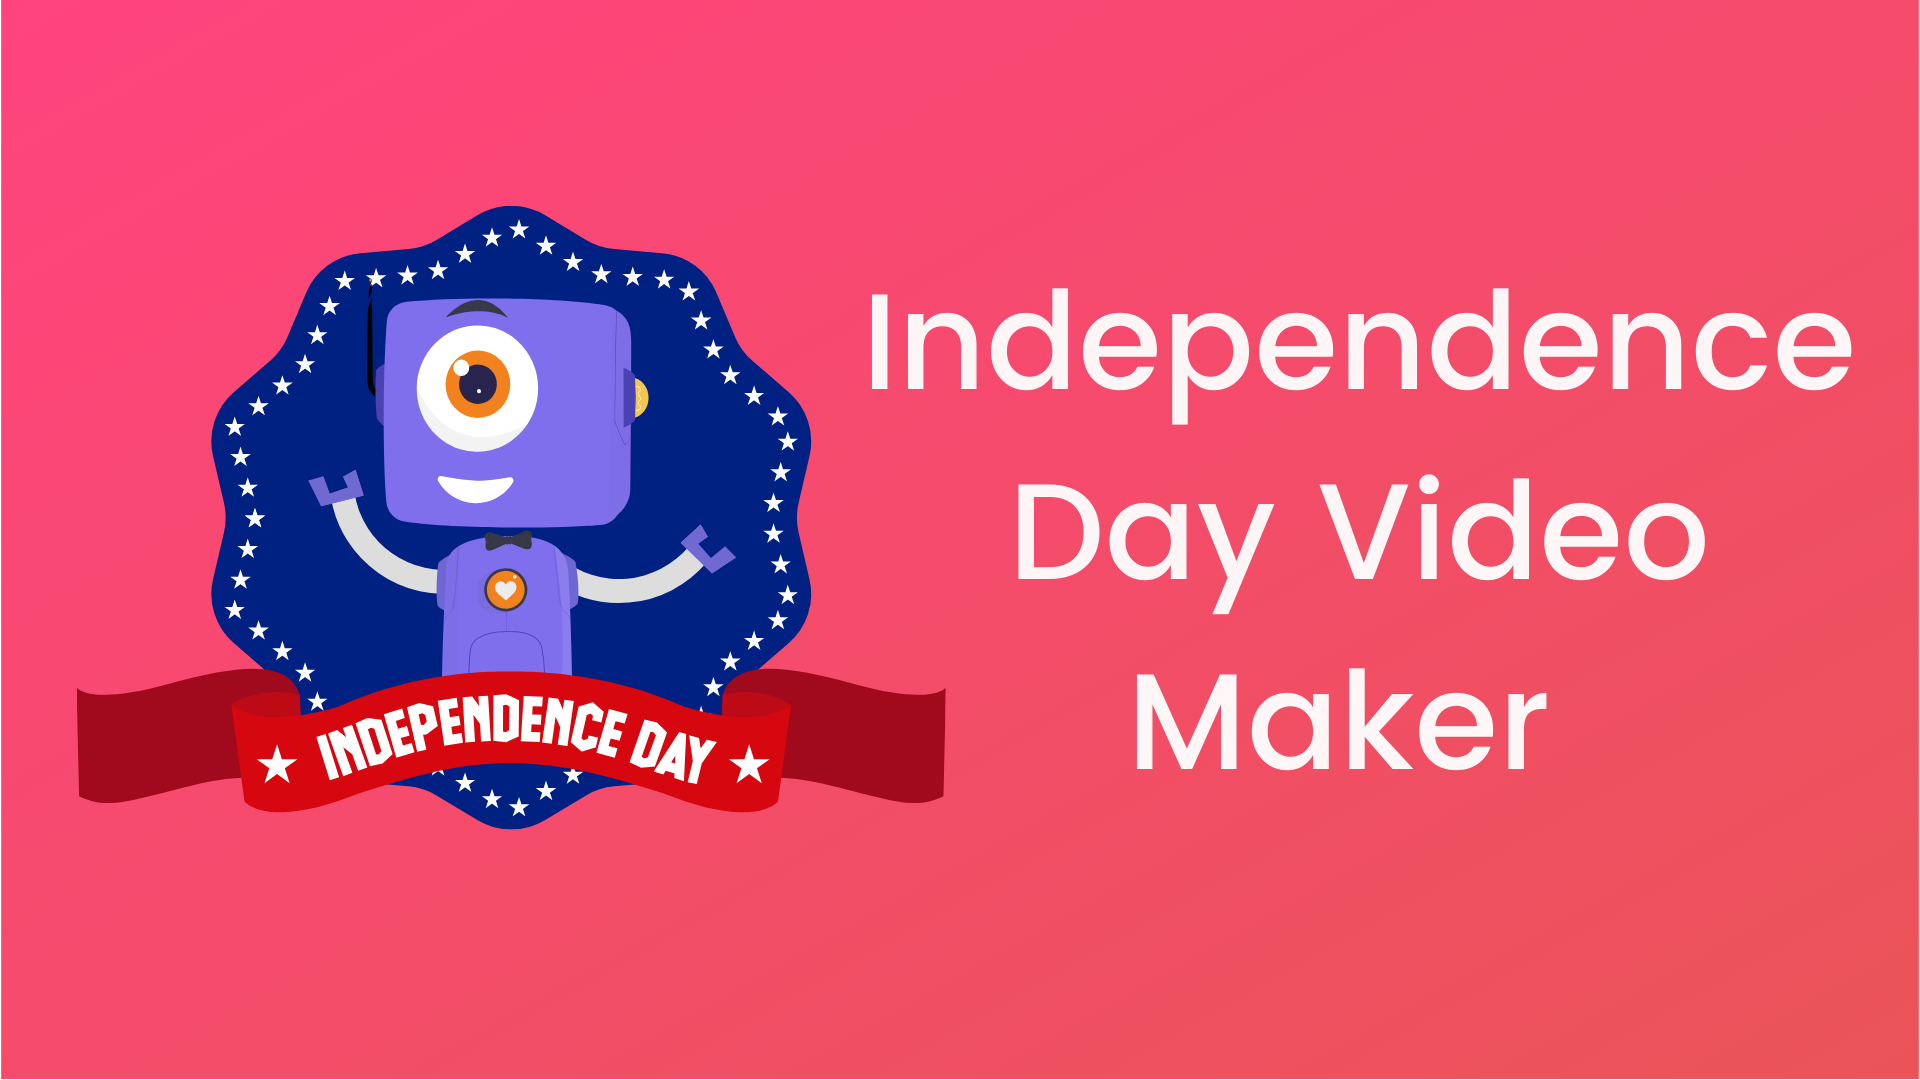 Easiest] Independence day video maker | 100+ Free templates